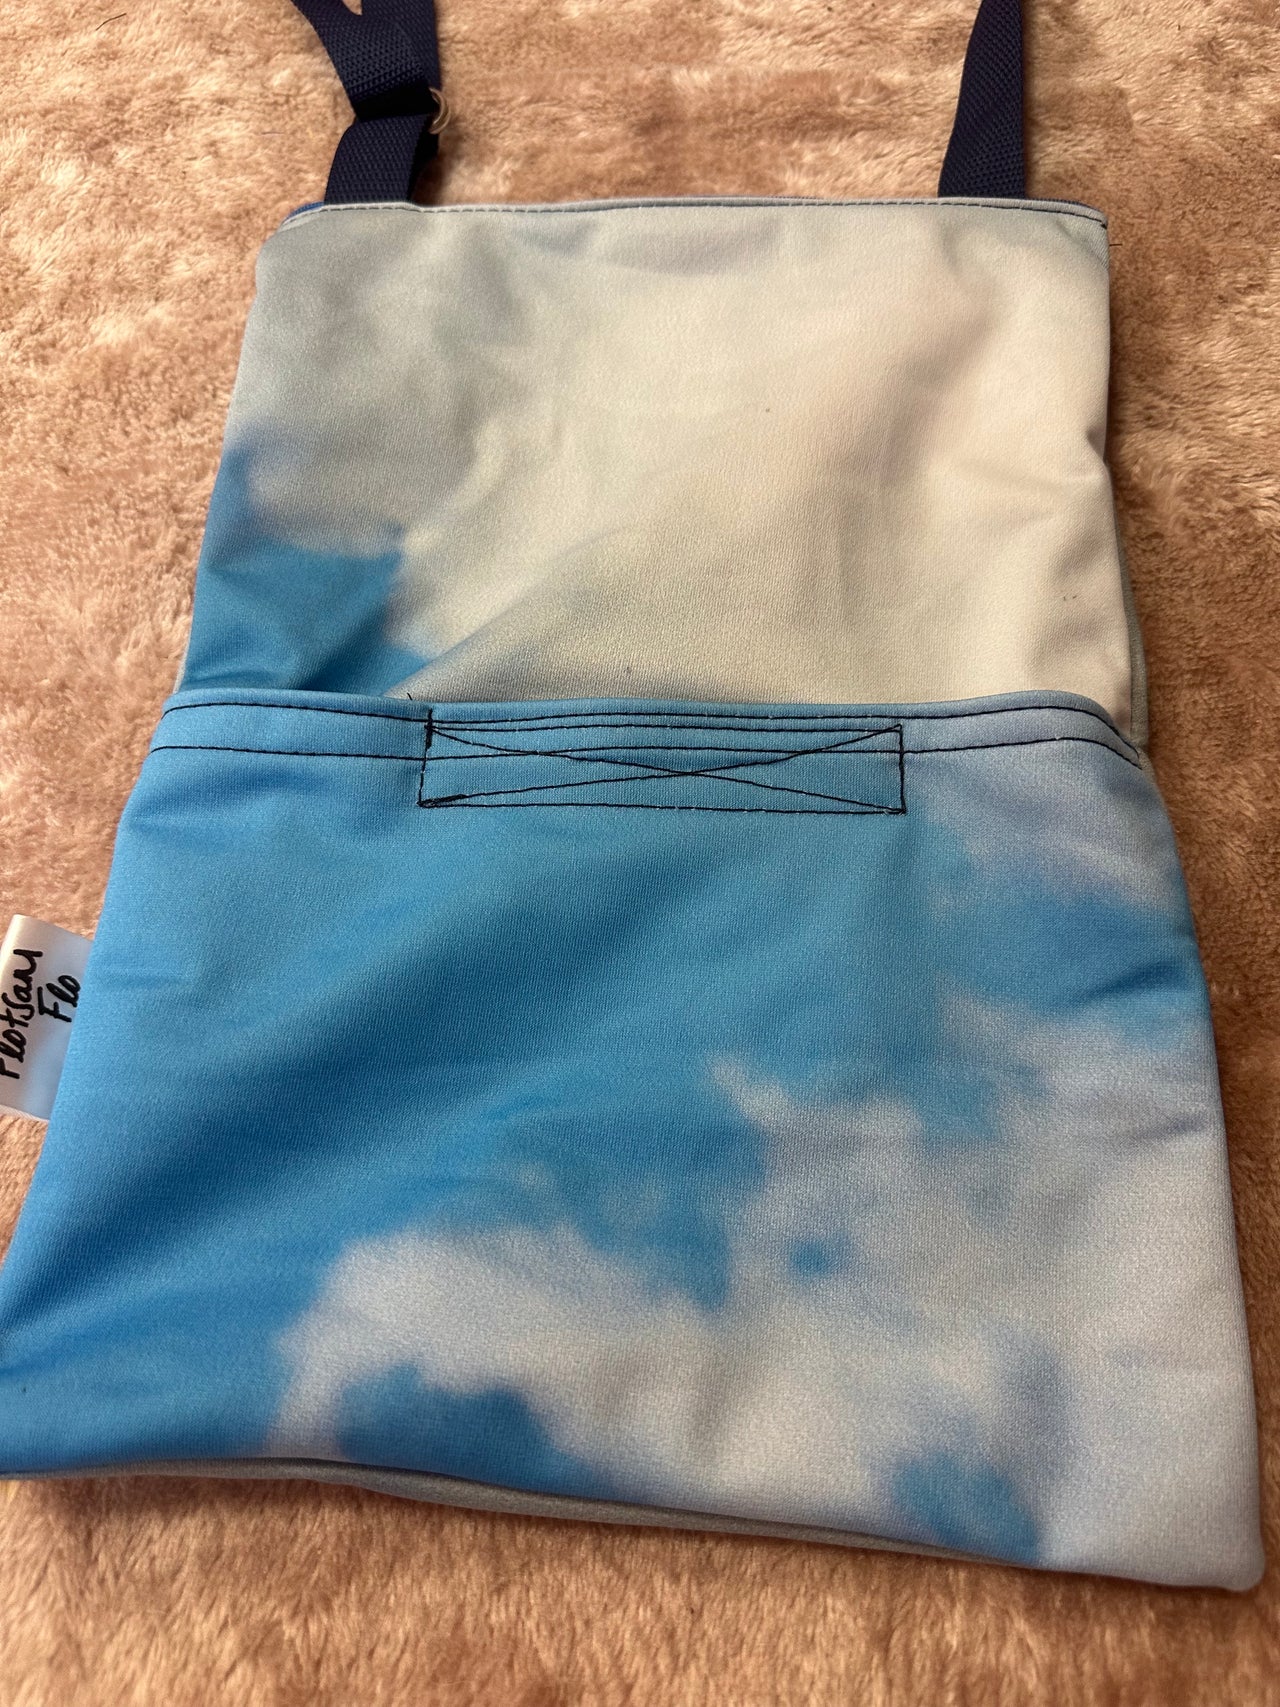 I used to be a Fabric Plastic based Banner - Cloud Cross body bag